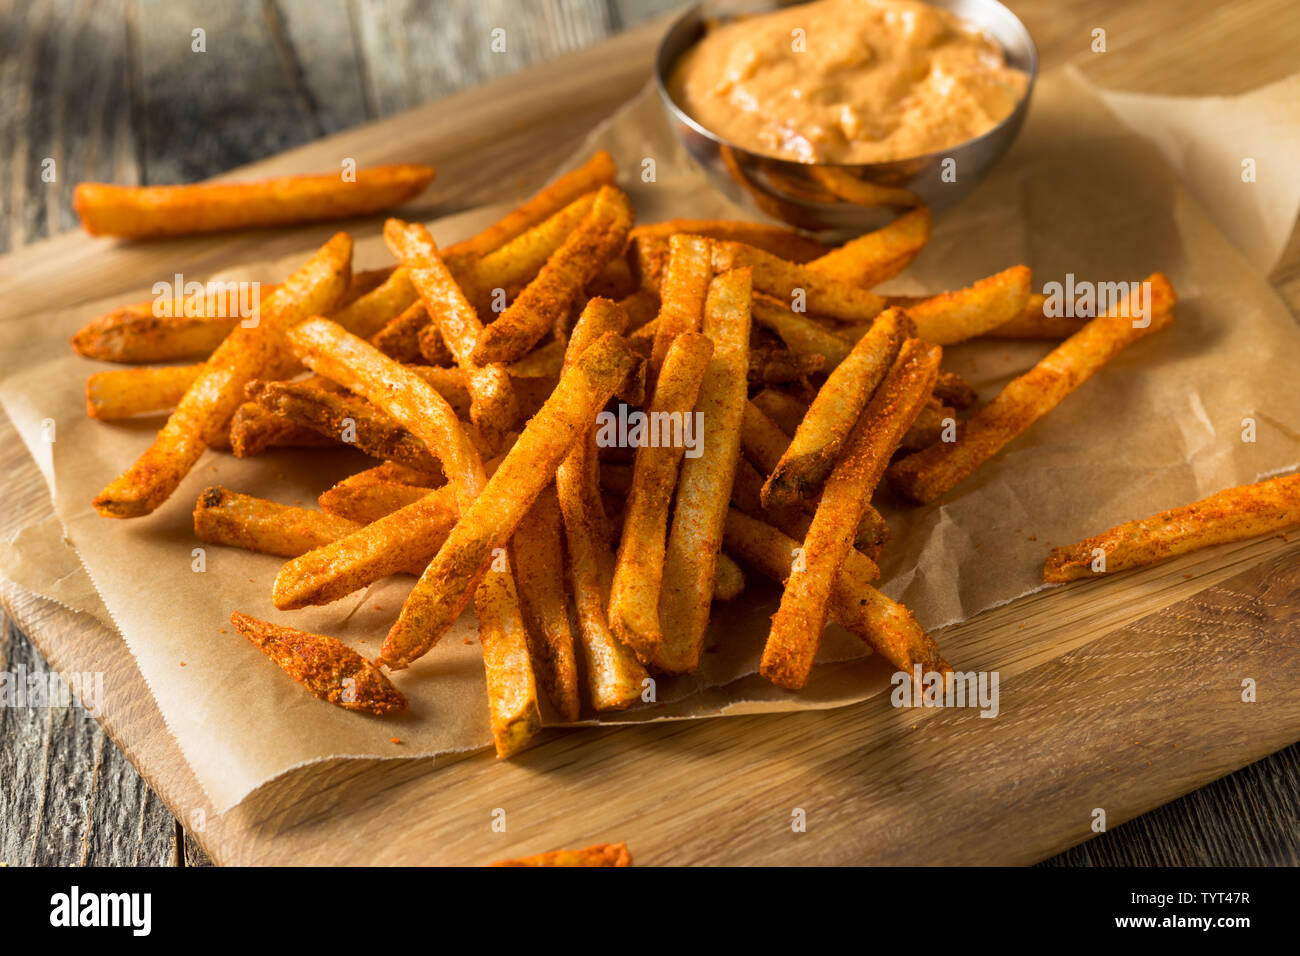 Homemade Spicy Mexican Nacho Fries with Cheese Sauce Stock Photo